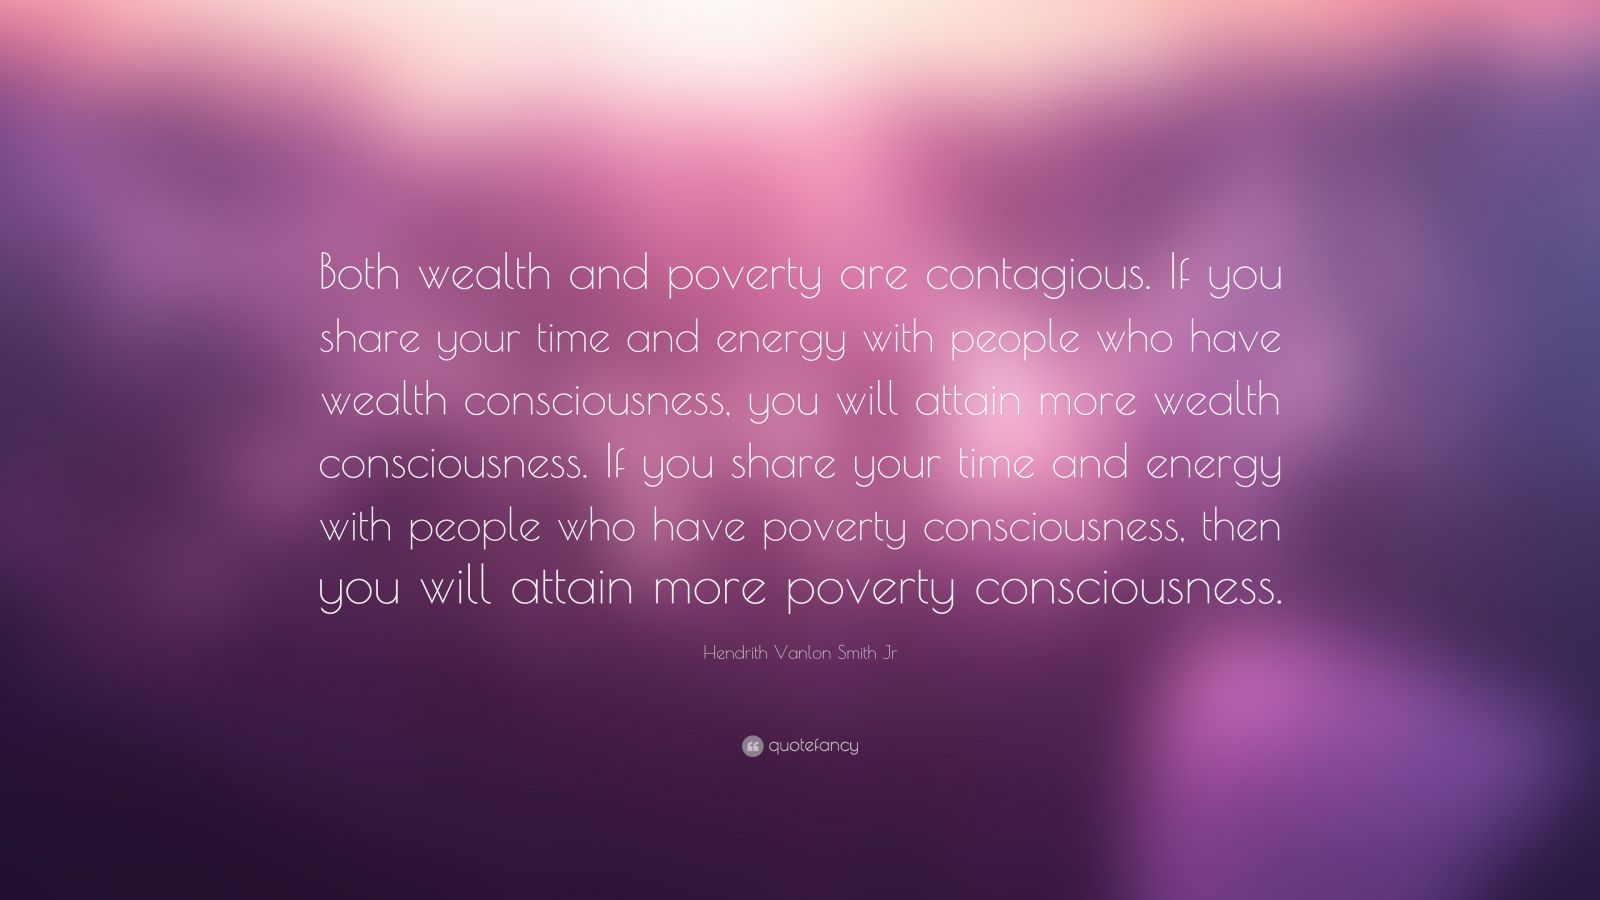 Hendrith Vanlon Smith Jr Quote: “Both wealth and poverty are contagious ...